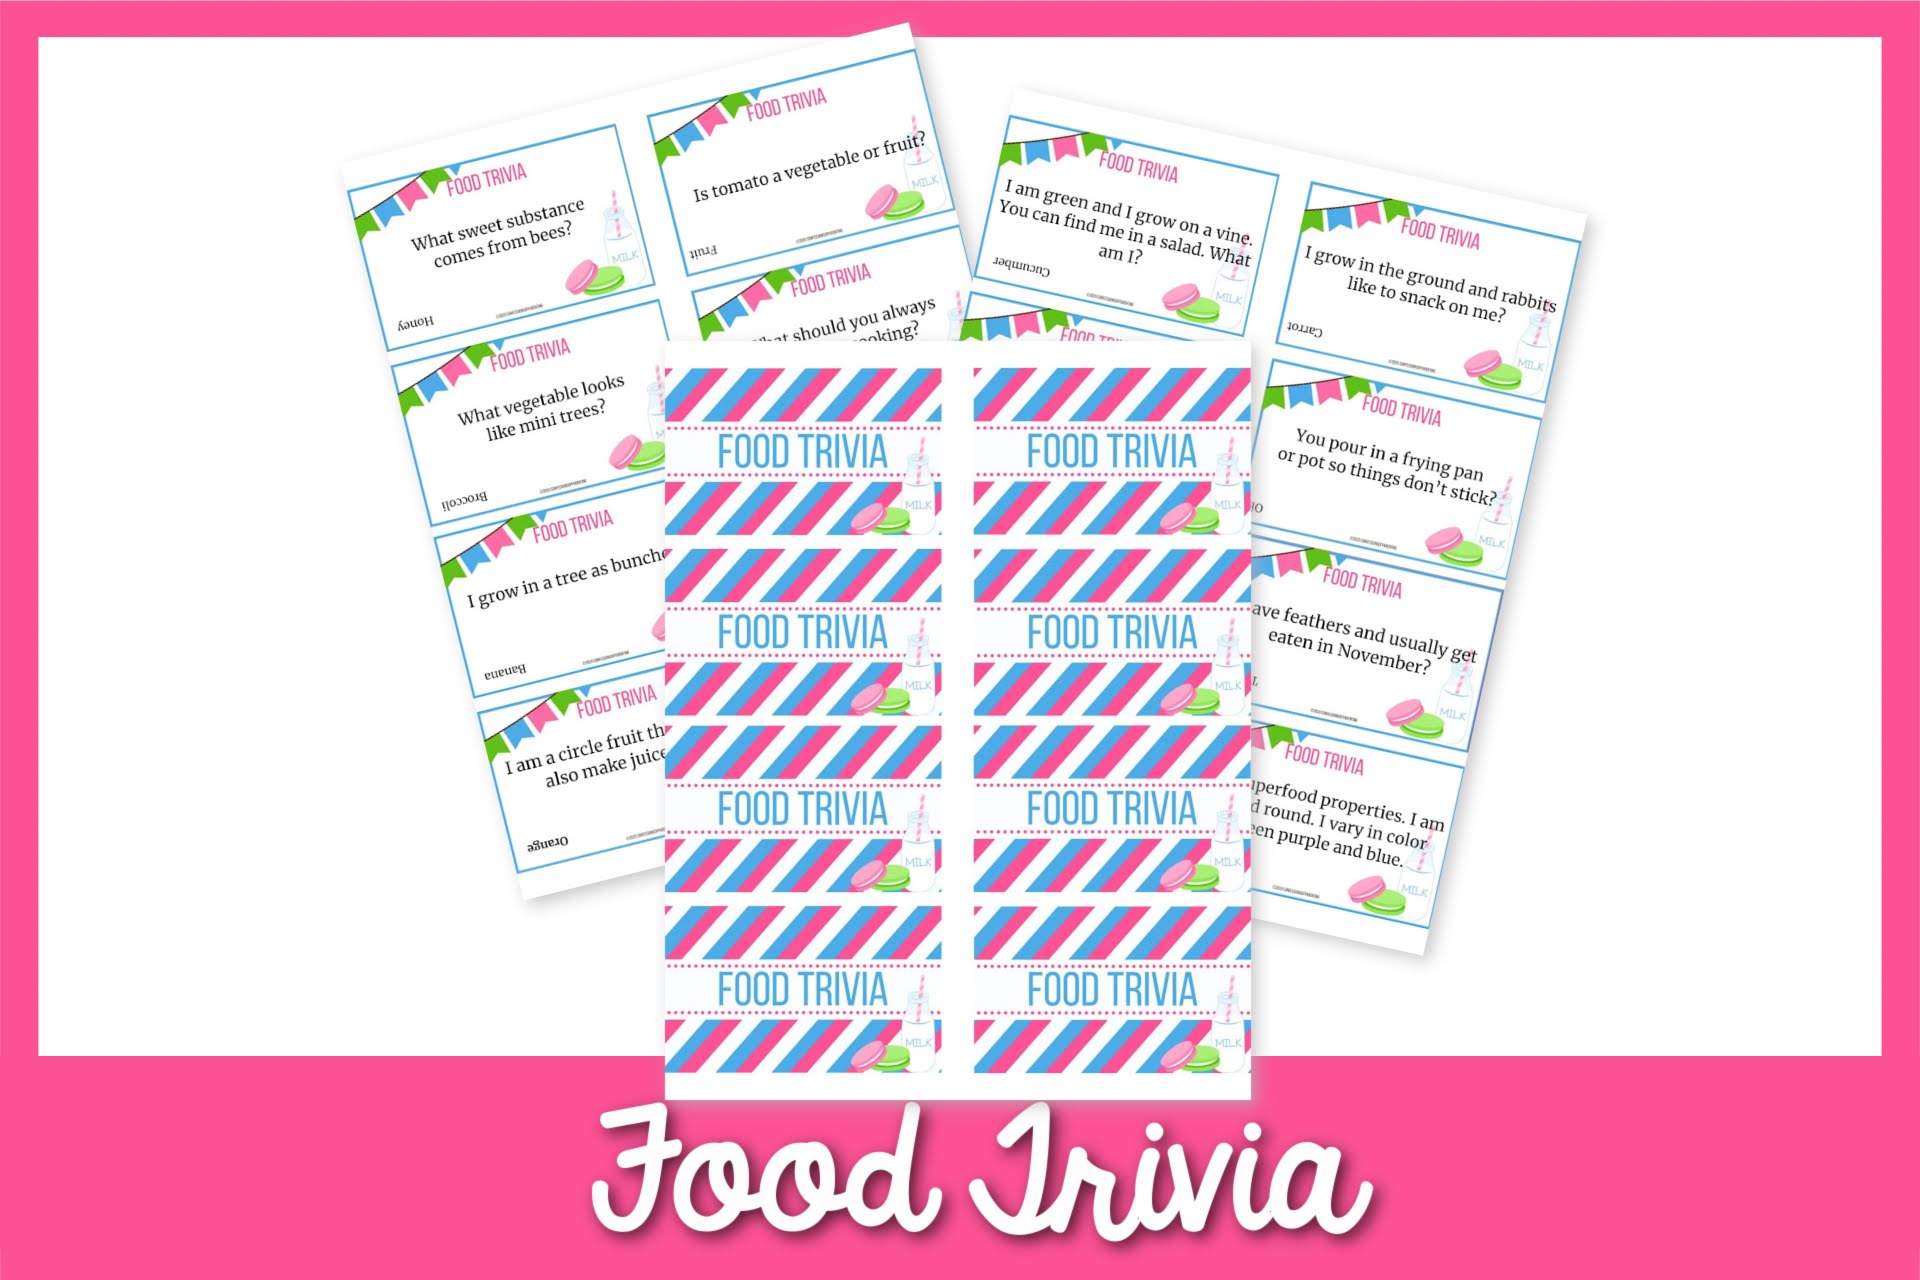 featured image: food trivia in a pink border